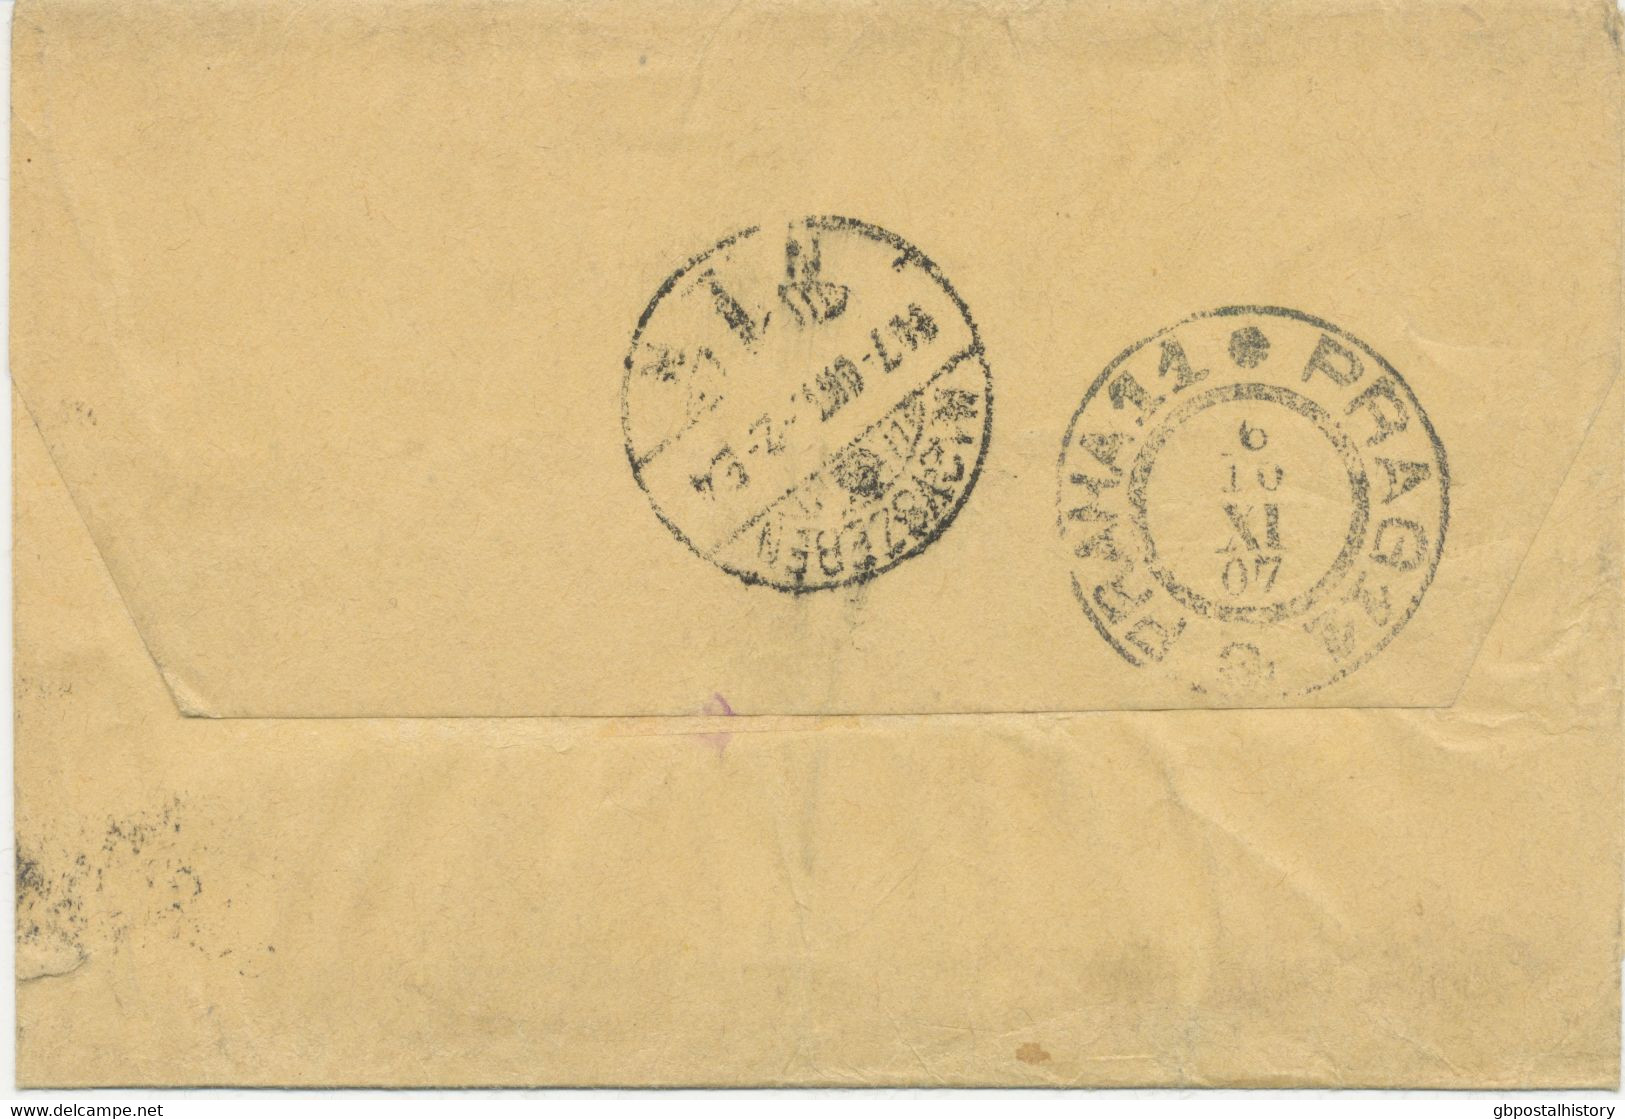 GB NPB LONDON „W / M“ CDS Postmark On Superb EVII ½d Yellowgreen Postal Stationery Wrapper Uprated With ½d, The Uncommon - Briefe U. Dokumente